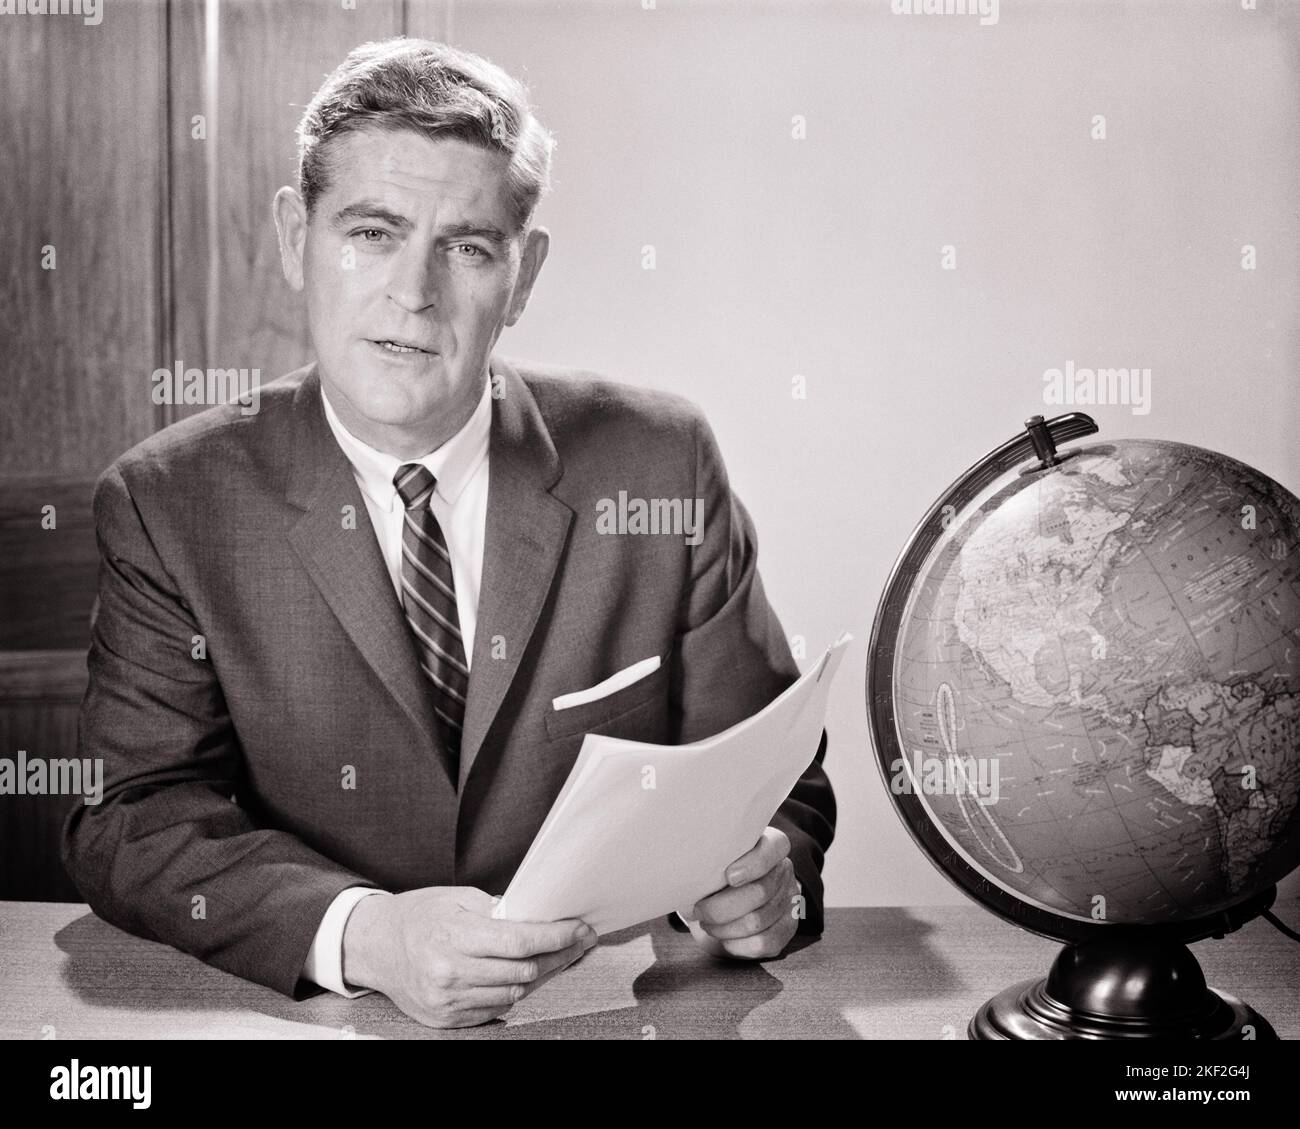 1960s MAN READING FROM DOCUMENT SEATED AT DESK WITH WORLD GLOBE LOOKING AT CAMERA TEACHER NEWSMAN ANNOUNCER BROADCASTER SPEAKER - s11506 HAR001 HARS JOURNALIST B&W EYE CONTACT TELEVISIONS BROADCASTER SUIT AND TIE RADIOS BROADCASTING DOCUMENT GLOBAL ANNOUNCER AUDIO INSTRUCTOR AUTHORITY OCCUPATIONS EDUCATOR CHANNELS EDUCATING EDUCATORS INSTRUCTORS MID-ADULT MID-ADULT MAN NEWSMAN SCHOOL TEACHES WORLDWIDE BLACK AND WHITE CAUCASIAN ETHNICITY HAR001 INTERCONTINENTAL INTERNATIONAL OLD FASHIONED Stock Photo